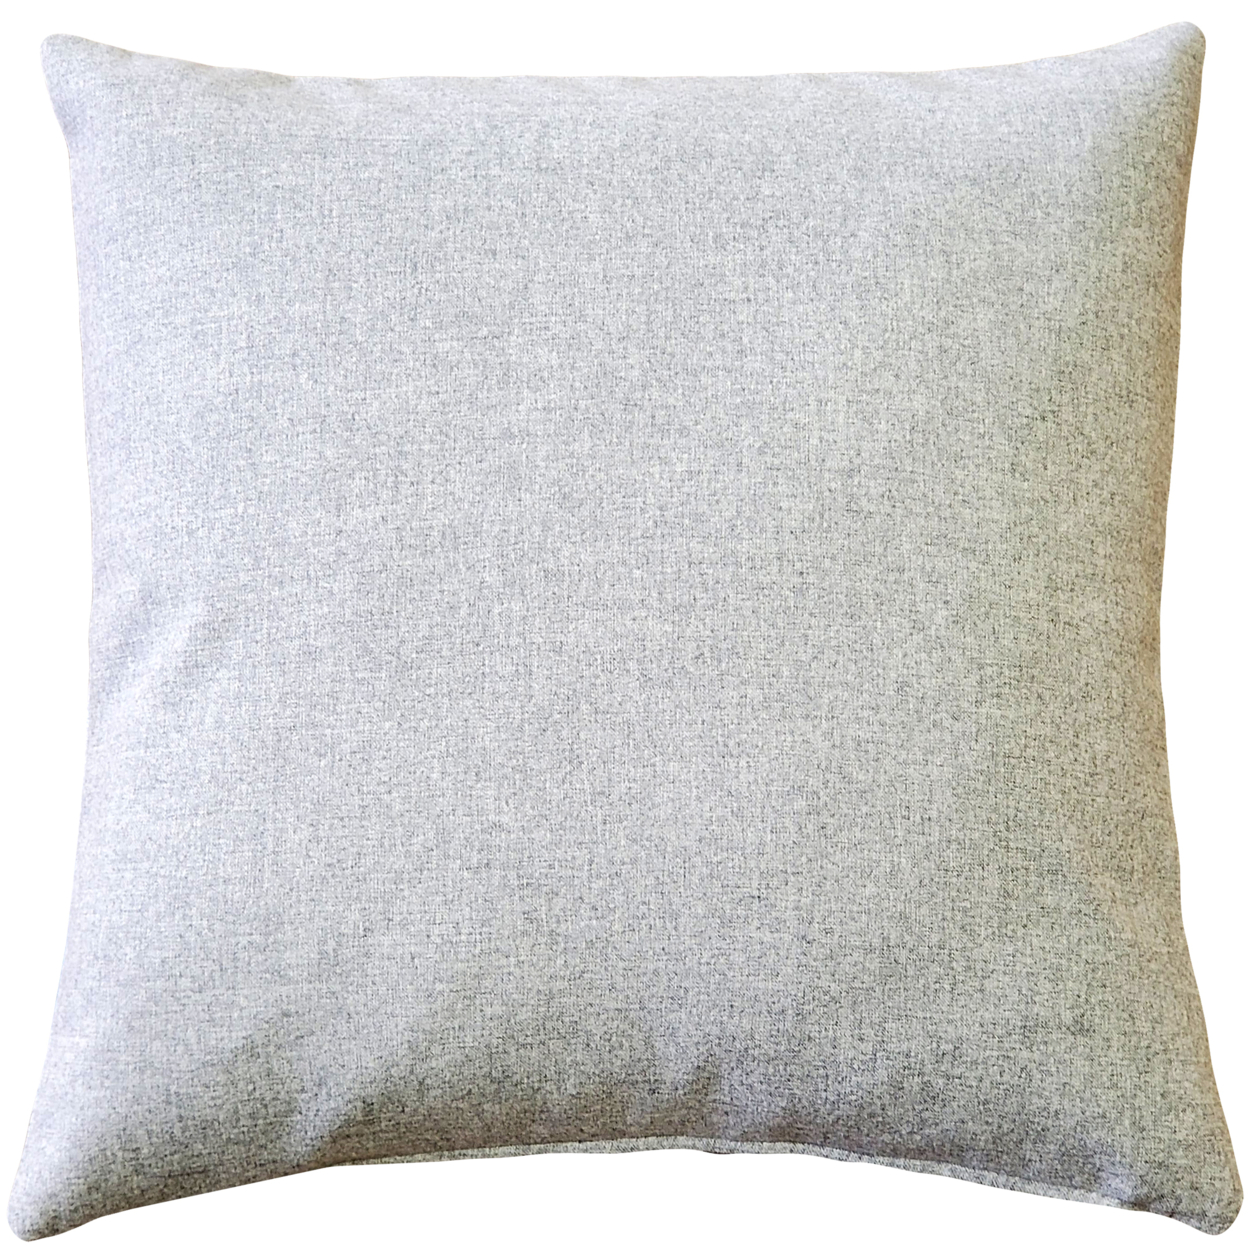 Aurora Paradiso Blue Throw Pillow 19x19 Inches Square, Complete Pillow With Polyfill Pillow Insert